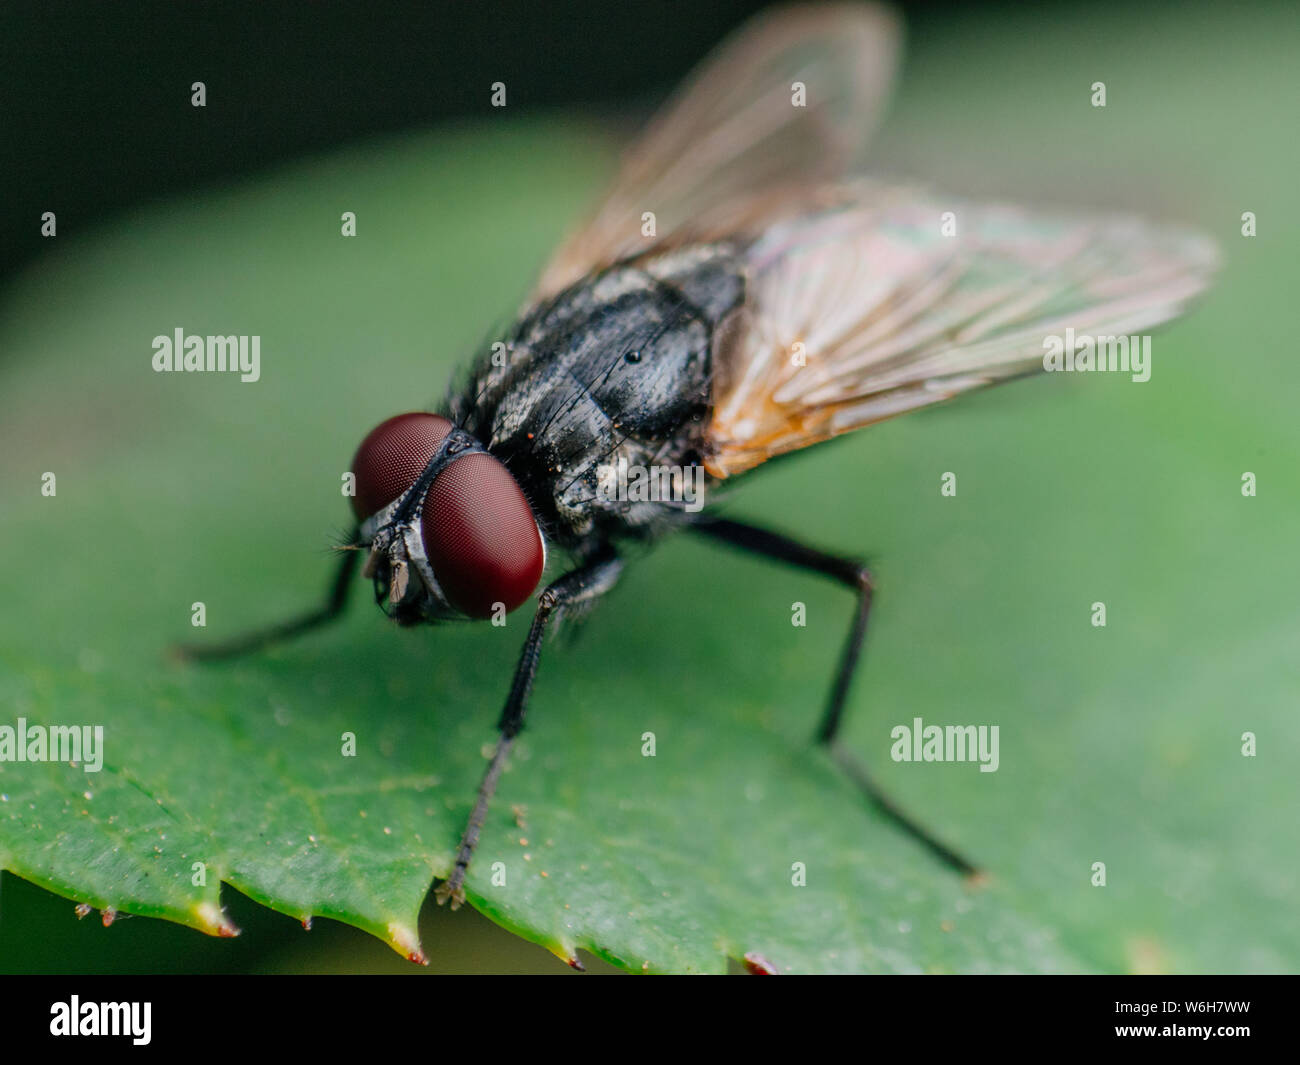 Extreme macro of a common housefly on a leaf Stock Photo